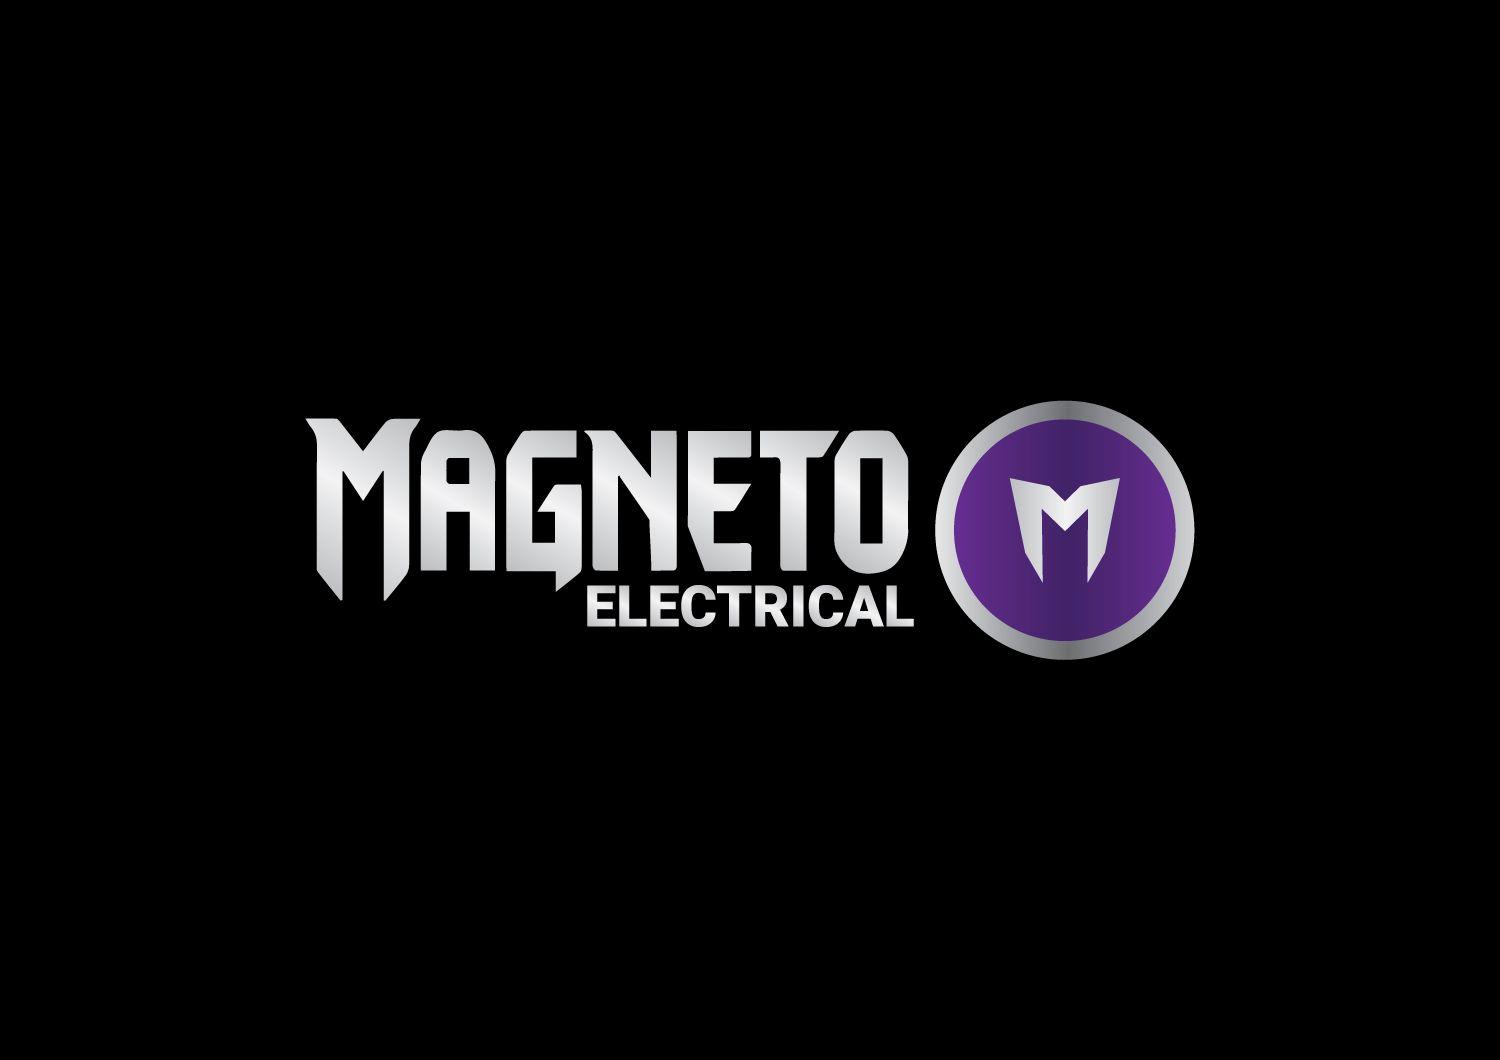 Magneto Logo - Electrical Logo Design for Magneto Electrical by Mads Steneman ...